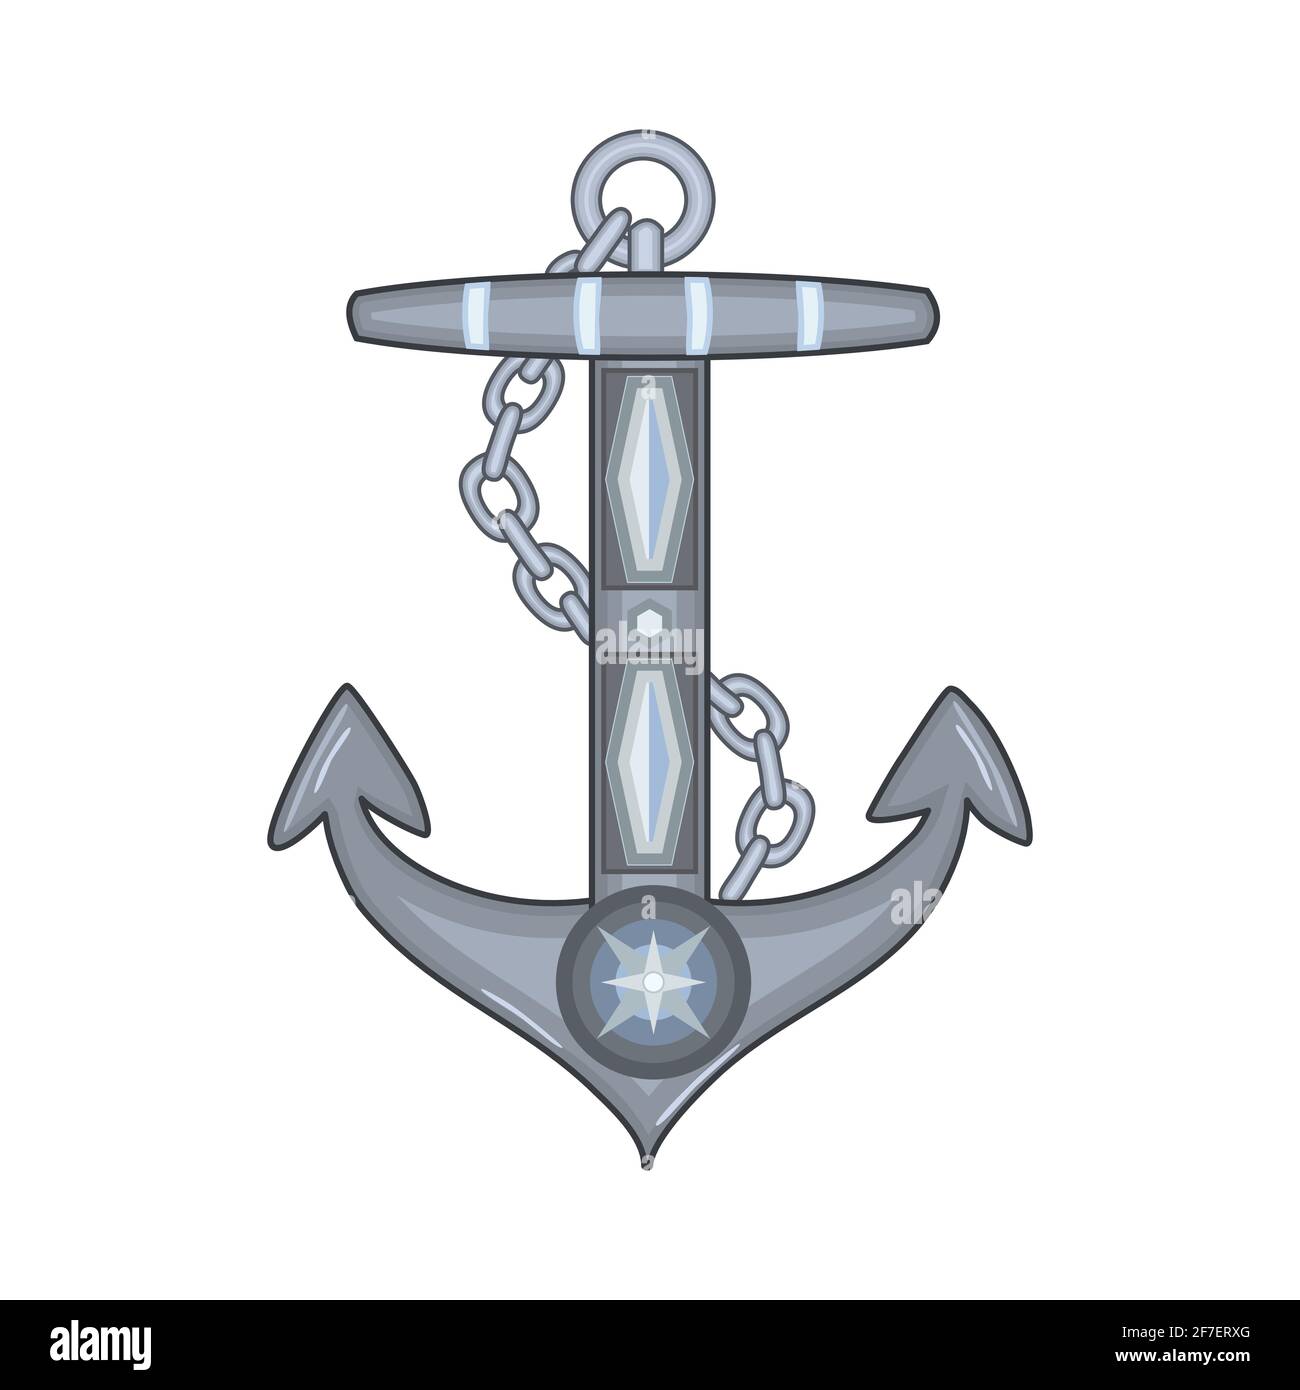 Ship anchor isolated on white background. Nautical symbol icon. Marine retro decorative item. Antique anchor with chain. Stock vector illustration Stock Vector